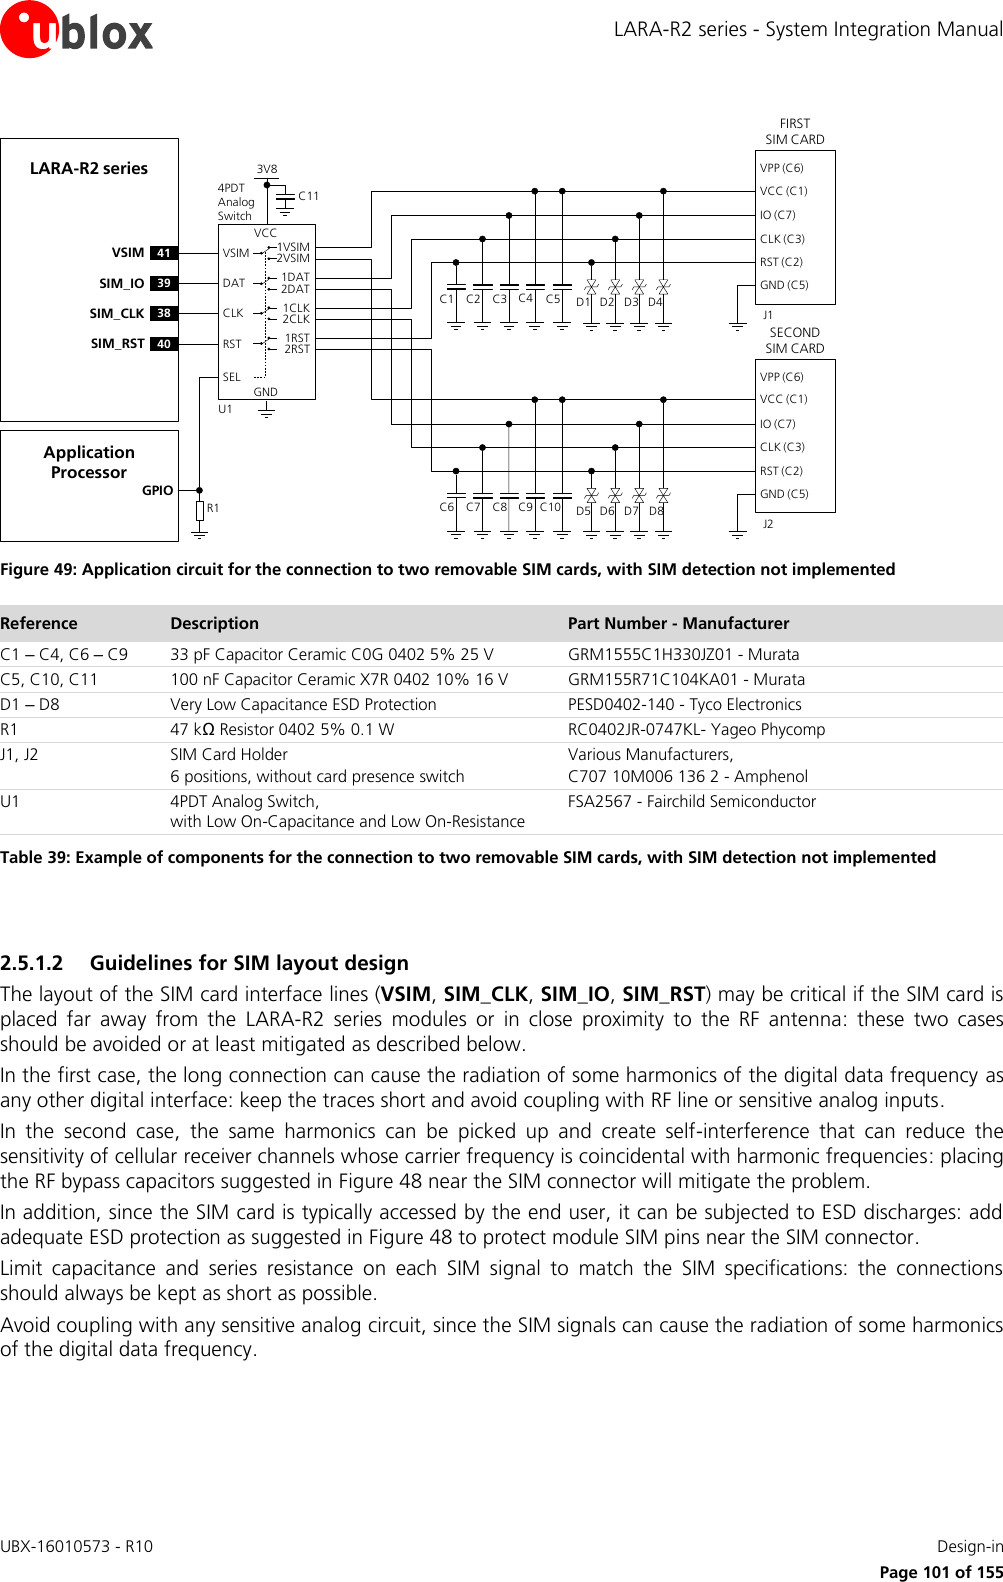 LARA-R2 series - System Integration Manual UBX-16010573 - R10    Design-in     Page 101 of 155 LARA-R2 seriesC1FIRST             SIM CARDVPP (C6)VCC (C1)IO (C7)CLK (C3)RST (C2)GND (C5)C2 C3 C5J1C4 D1 D2 D3 D4GNDU141VSIM VSIM 1VSIM2VSIMVCCC114PDT Analog Switch3V839SIM_IO DAT 1DAT2DAT38SIM_CLK CLK 1CLK2CLK40SIM_RST RST 1RST2RSTSELSECOND   SIM CARDVPP (C6)VCC (C1)IO (C7)CLK (C3)RST (C2)GND (C5)J2C6 C7 C8 C10C9 D5 D6 D7 D8Application ProcessorGPIOR1 Figure 49: Application circuit for the connection to two removable SIM cards, with SIM detection not implemented Reference Description Part Number - Manufacturer C1 – C4, C6 – C9 33 pF Capacitor Ceramic C0G 0402 5% 25 V GRM1555C1H330JZ01 - Murata C5, C10, C11 100 nF Capacitor Ceramic X7R 0402 10% 16 V GRM155R71C104KA01 - Murata D1 – D8 Very Low Capacitance ESD Protection PESD0402-140 - Tyco Electronics  R1 47 kΩ Resistor 0402 5% 0.1 W RC0402JR-0747KL- Yageo Phycomp J1, J2 SIM Card Holder 6 positions, without card presence switch Various Manufacturers, C707 10M006 136 2 - Amphenol U1 4PDT Analog Switch,  with Low On-Capacitance and Low On-Resistance FSA2567 - Fairchild Semiconductor Table 39: Example of components for the connection to two removable SIM cards, with SIM detection not implemented   2.5.1.2 Guidelines for SIM layout design The layout of the SIM card interface lines (VSIM, SIM_CLK, SIM_IO, SIM_RST) may be critical if the SIM card is placed  far  away  from  the  LARA-R2  series  modules  or  in  close  proximity  to  the  RF  antenna:  these  two  cases should be avoided or at least mitigated as described below.  In the first case, the long connection can cause the radiation of some harmonics of the digital data frequency as any other digital interface: keep the traces short and avoid coupling with RF line or sensitive analog inputs. In  the  second  case,  the  same  harmonics  can  be  picked  up  and  create  self-interference  that  can  reduce  the sensitivity of cellular receiver channels whose carrier frequency is coincidental with harmonic frequencies: placing the RF bypass capacitors suggested in Figure 48 near the SIM connector will mitigate the problem. In addition, since the SIM card is typically accessed by the end user, it can be subjected to ESD discharges: add adequate ESD protection as suggested in Figure 48 to protect module SIM pins near the SIM connector. Limit  capacitance  and  series  resistance  on  each  SIM  signal  to  match  the  SIM  specifications:  the  connections should always be kept as short as possible. Avoid coupling with any sensitive analog circuit, since the SIM signals can cause the radiation of some harmonics of the digital data frequency.  